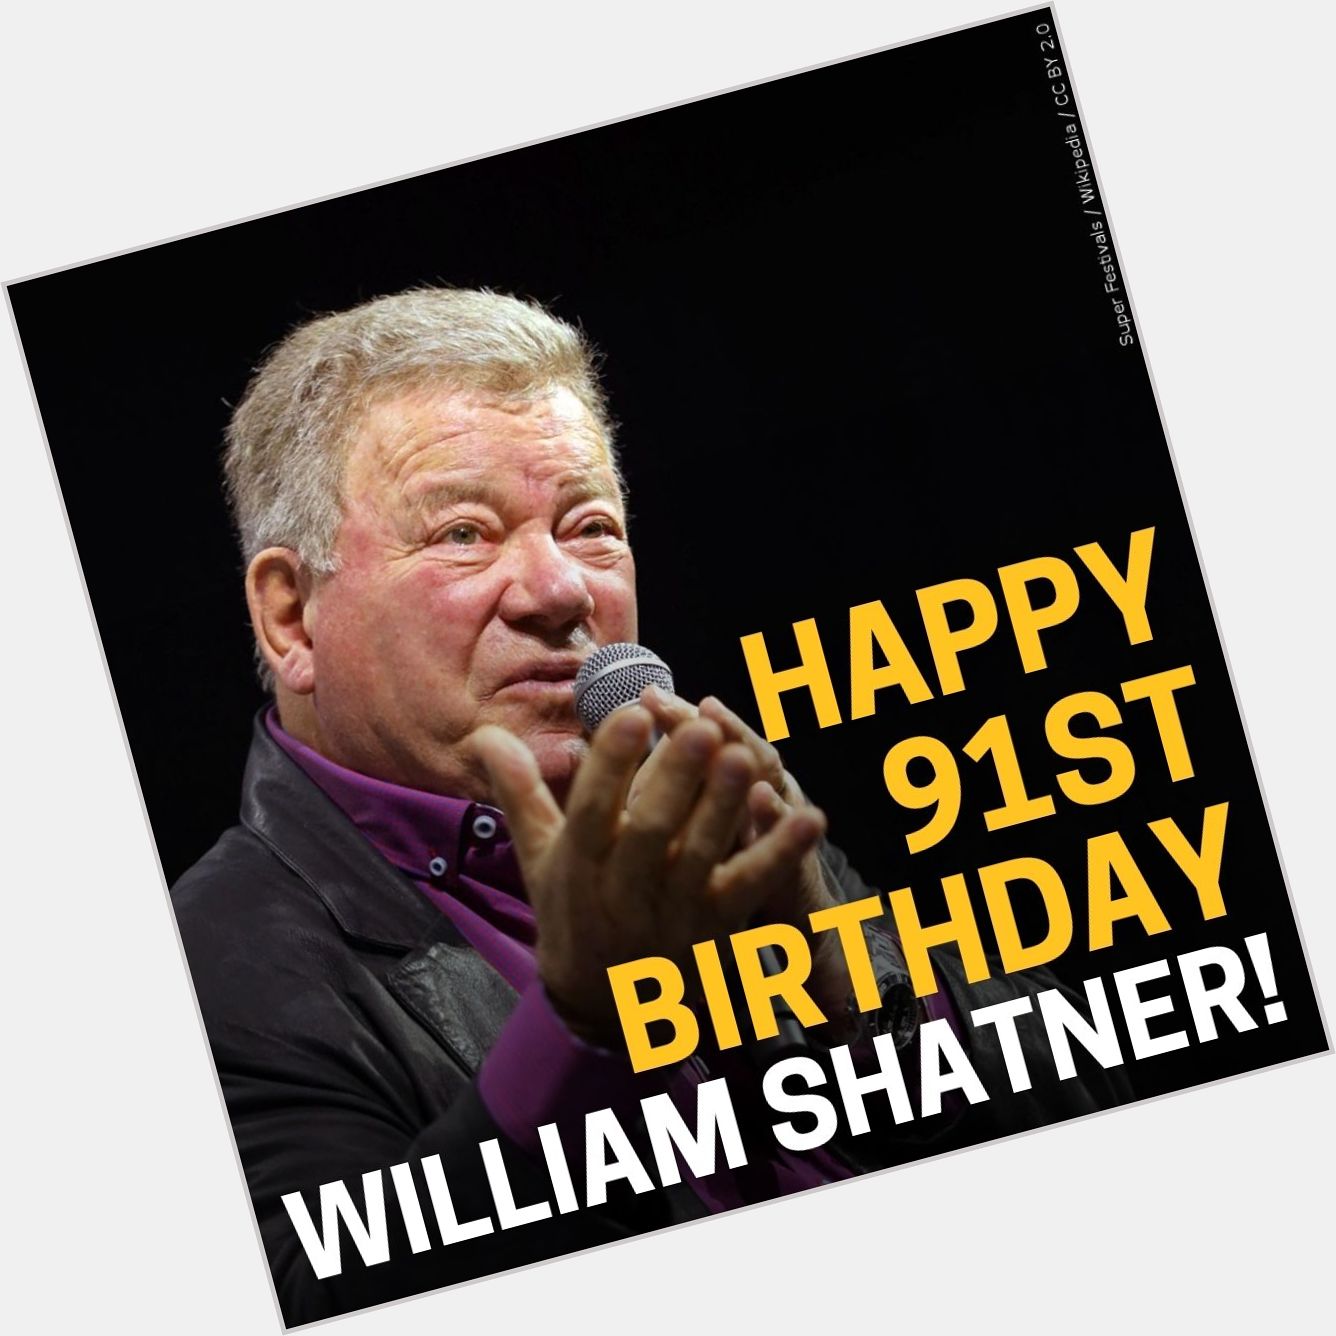 Happy 91st Birthday William Shatner! He is best known for playing Captain Kirk in \"Star Trek\". 